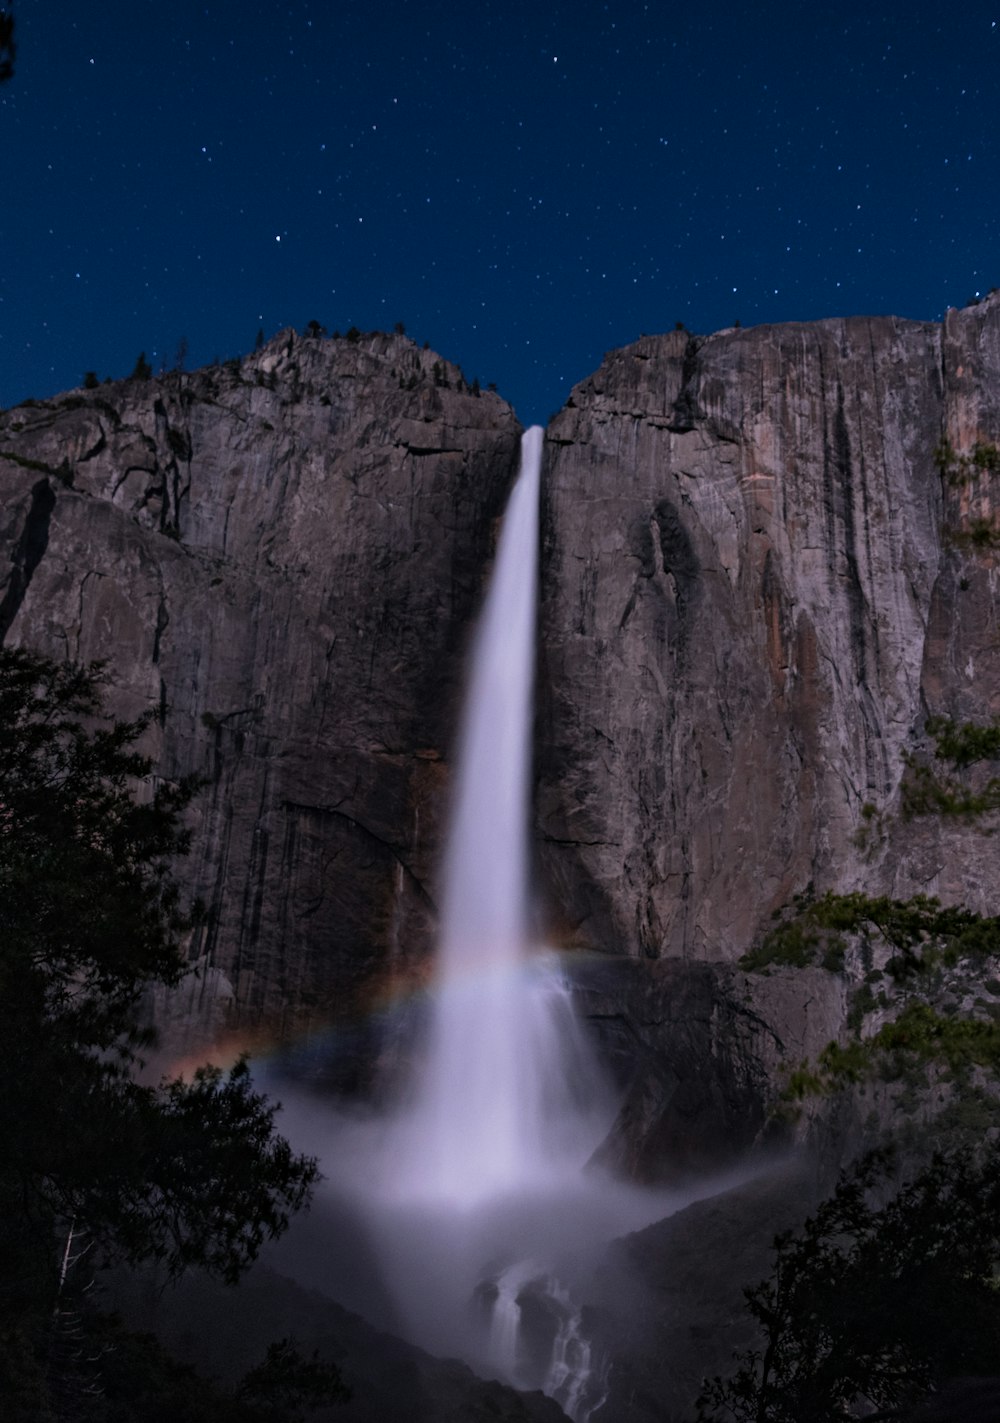 rainbow in front of waterfalls at night time